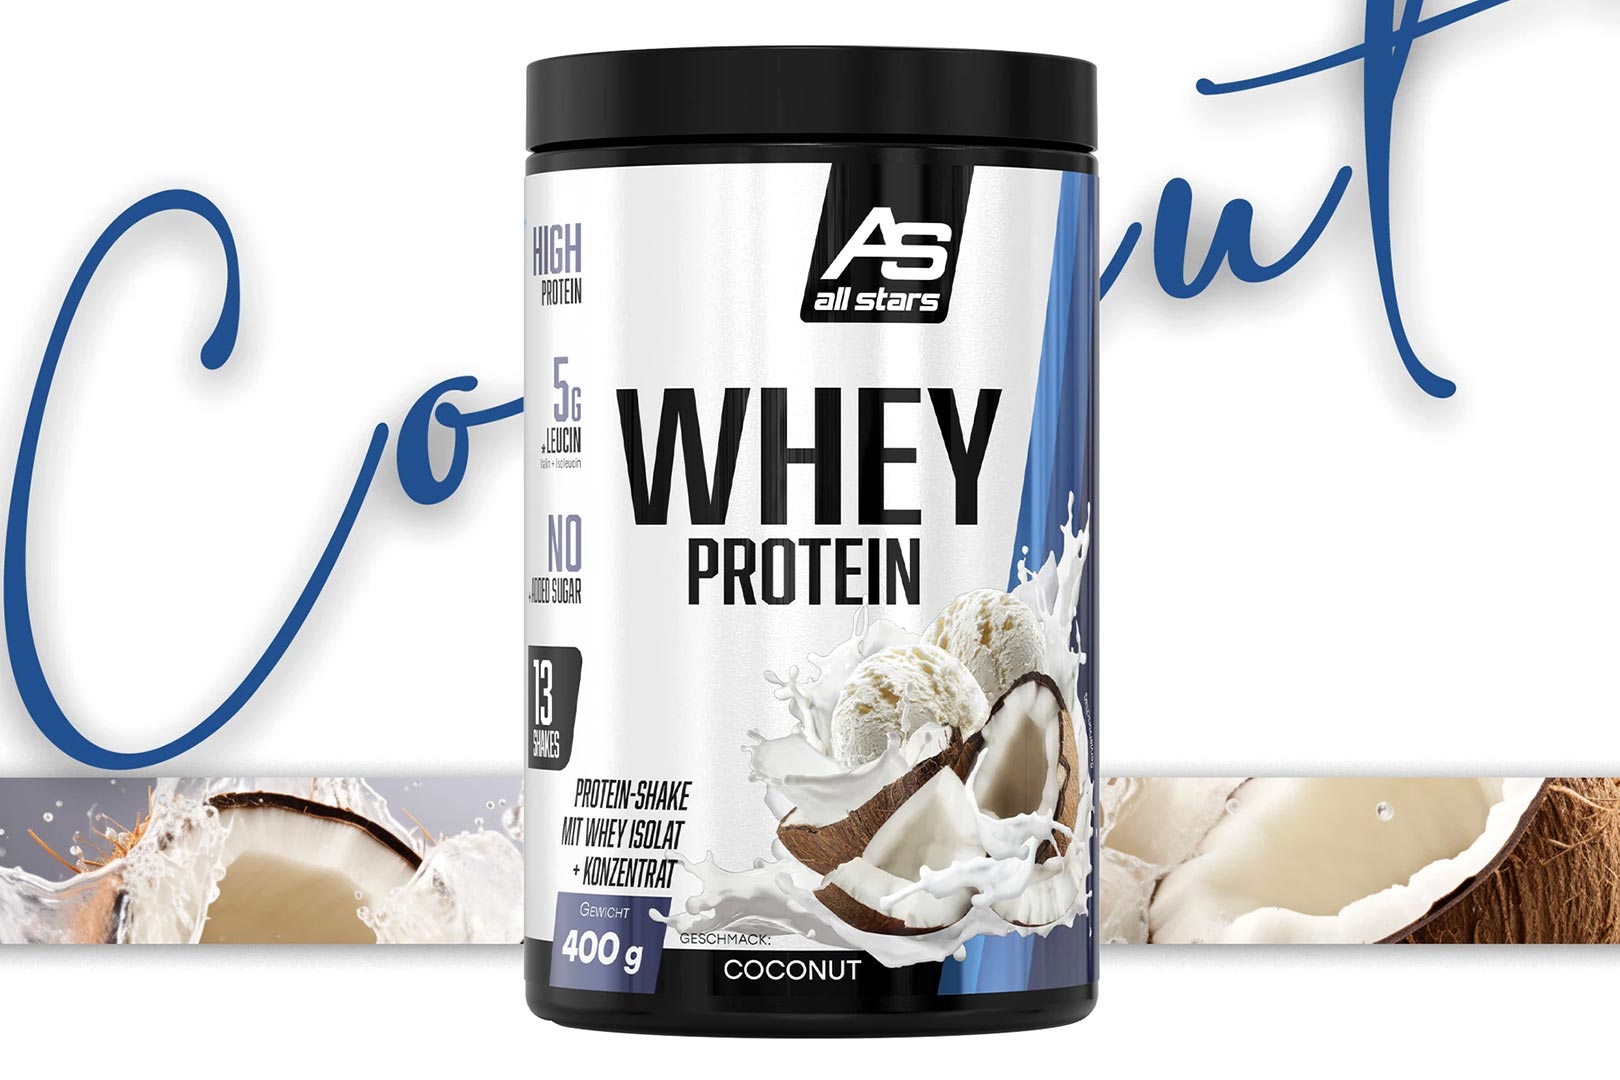 All Stars Coconut Whey Protein